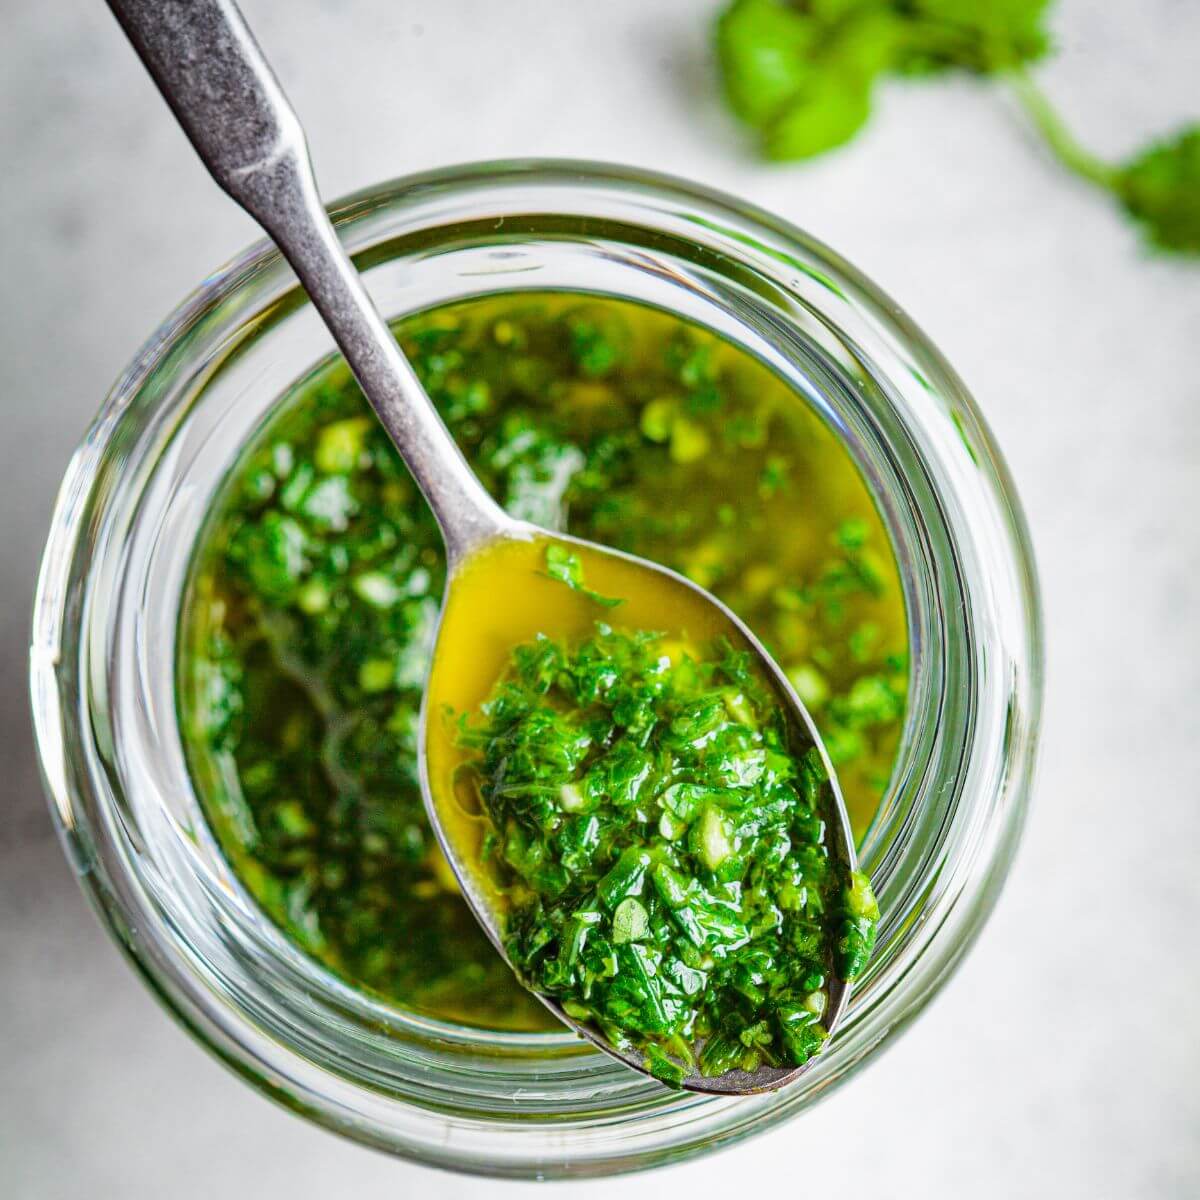 Jar filled with vibrant green chimichurri sauce